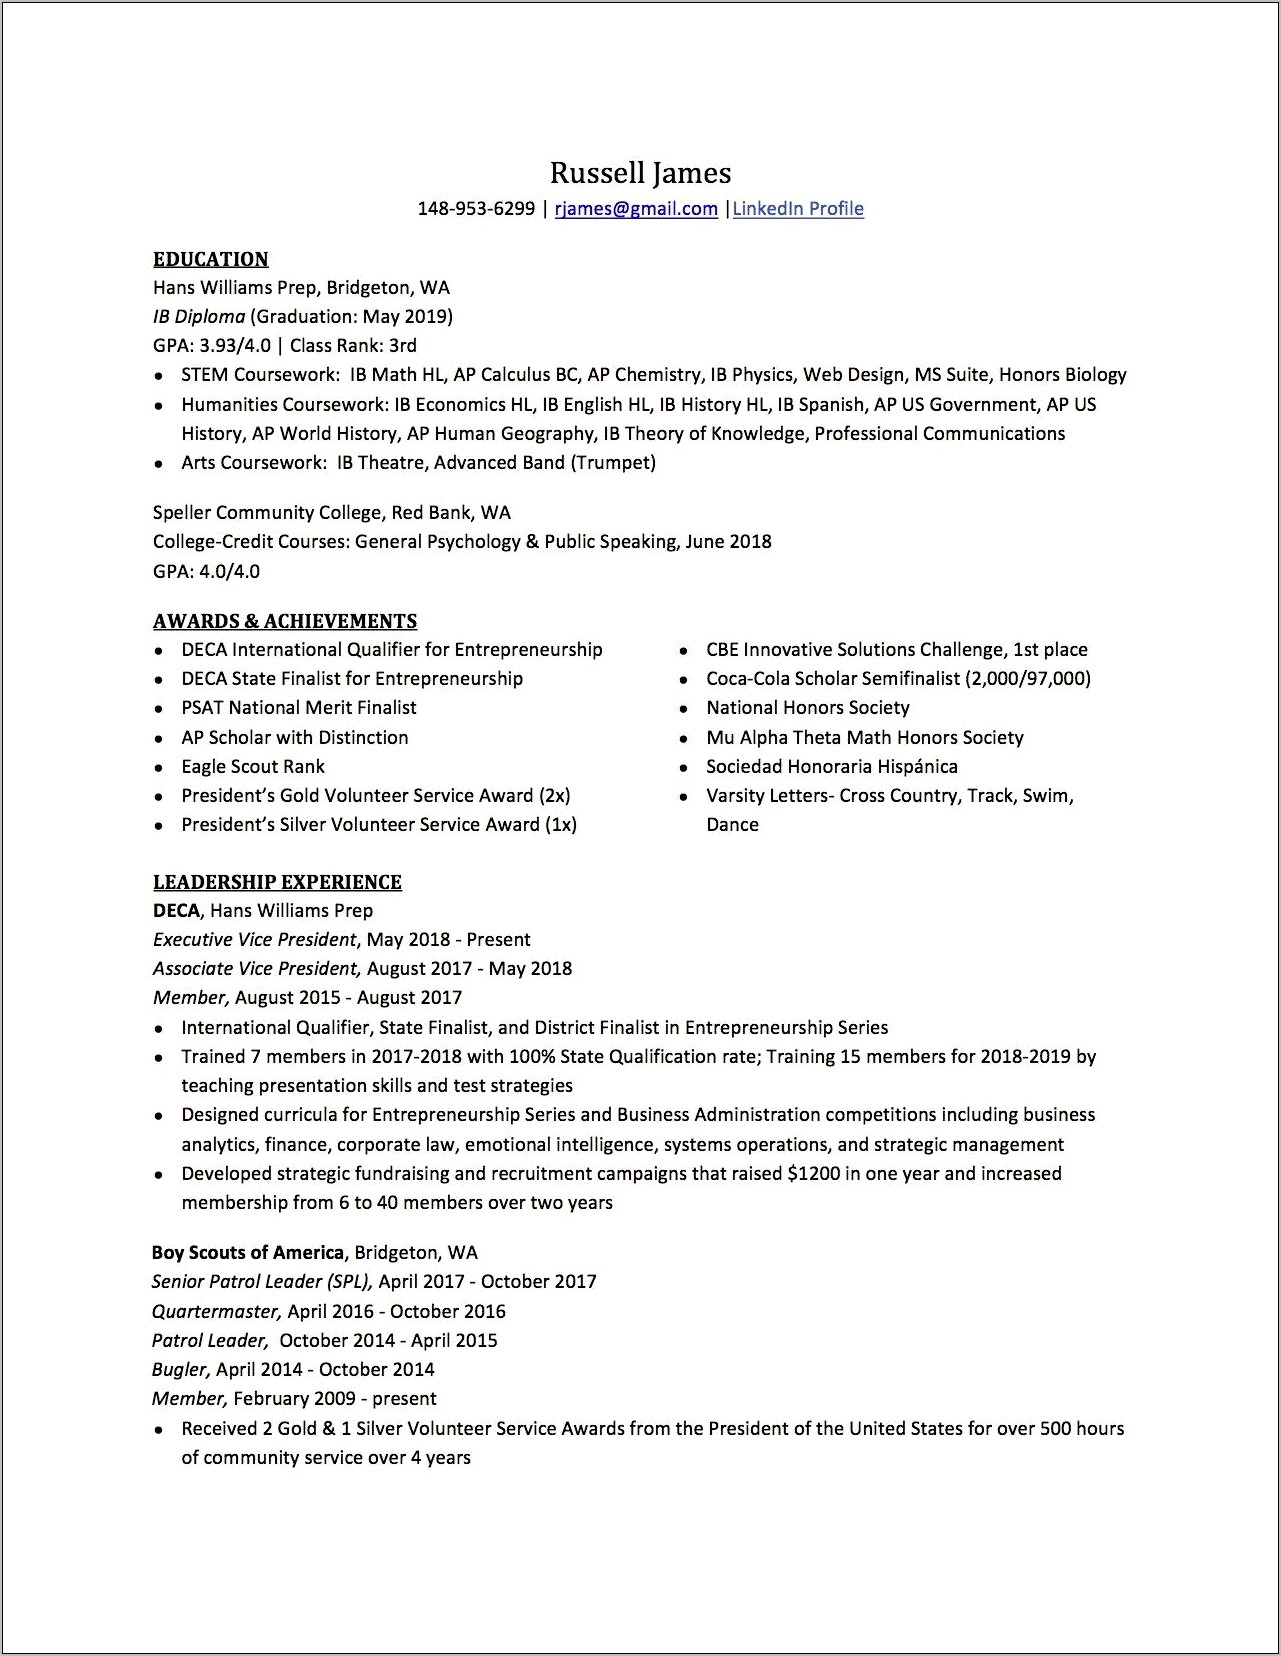 High School On Resume If College Degree